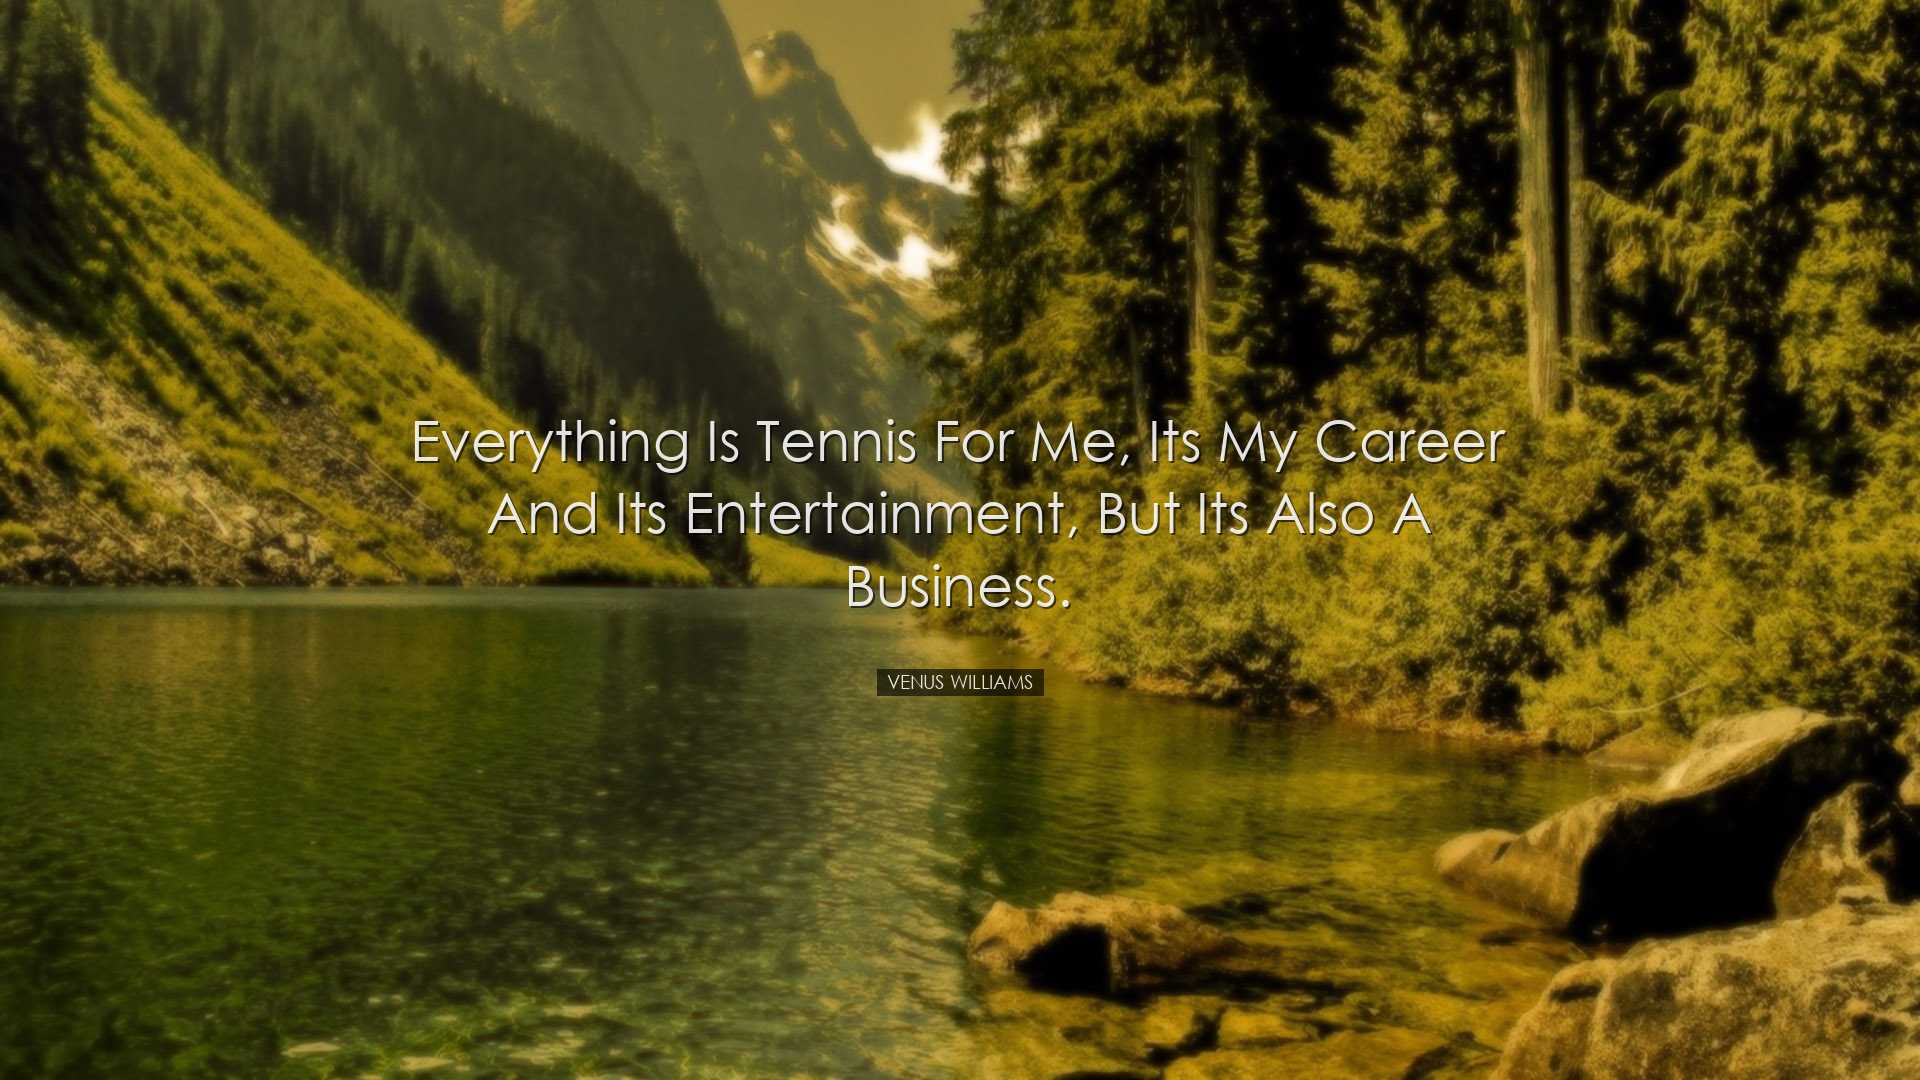 Everything is tennis for me, its my career and its entertainment,